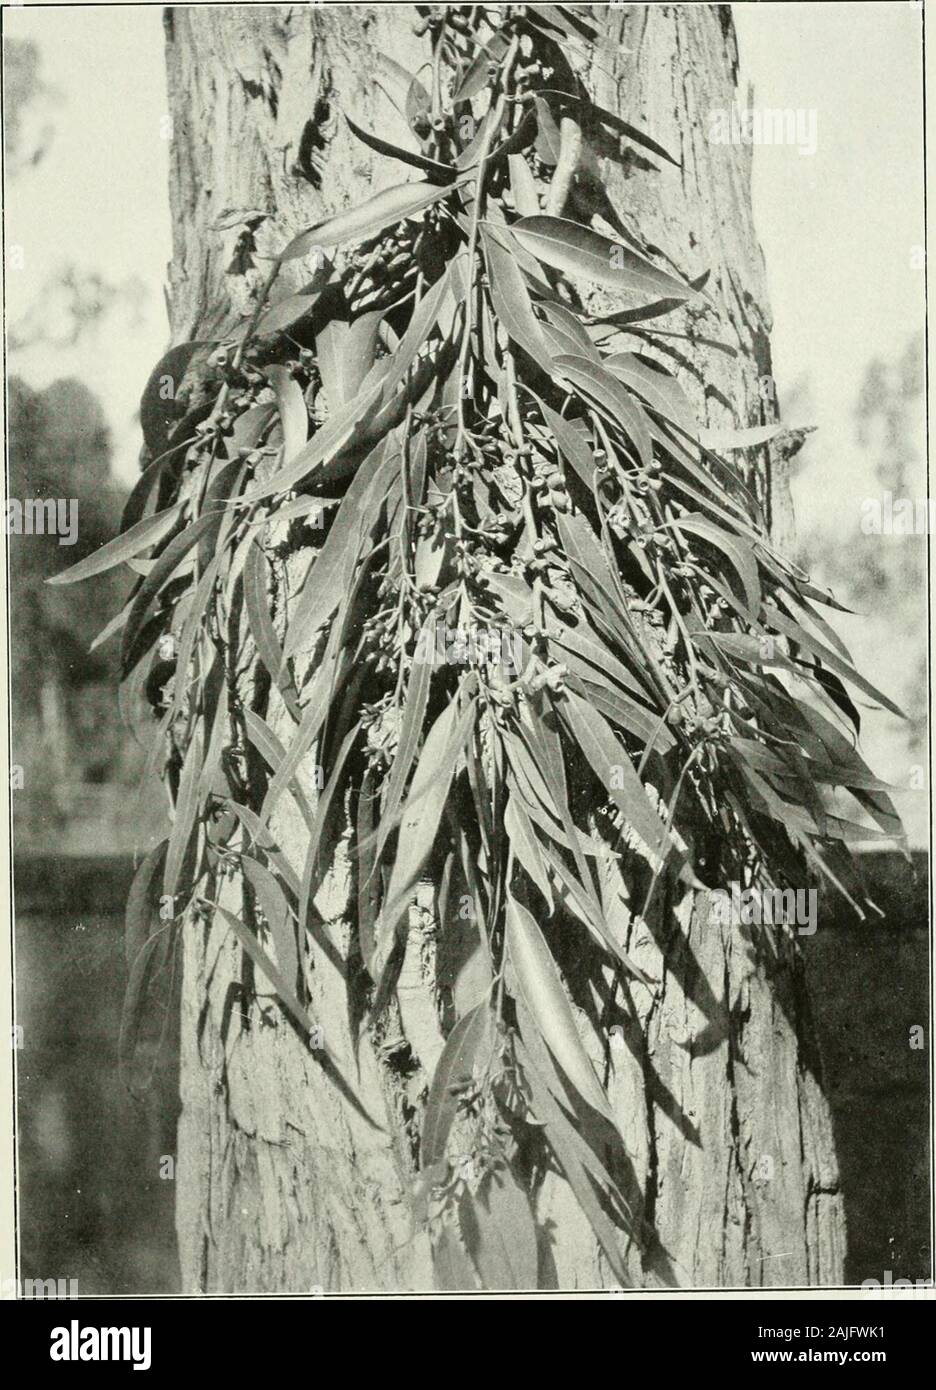 Eucalypts cultivated in the United States . Eucalyptus amygdalina. 3ui. 35, Bureau of Forestry, U. S Dept. of Agriculture. Plate LI.. Eucalyptus botryoiues. Bui. 35, Bureau of Forestry, U. S- Dept. of Agriculture. Stock Photo